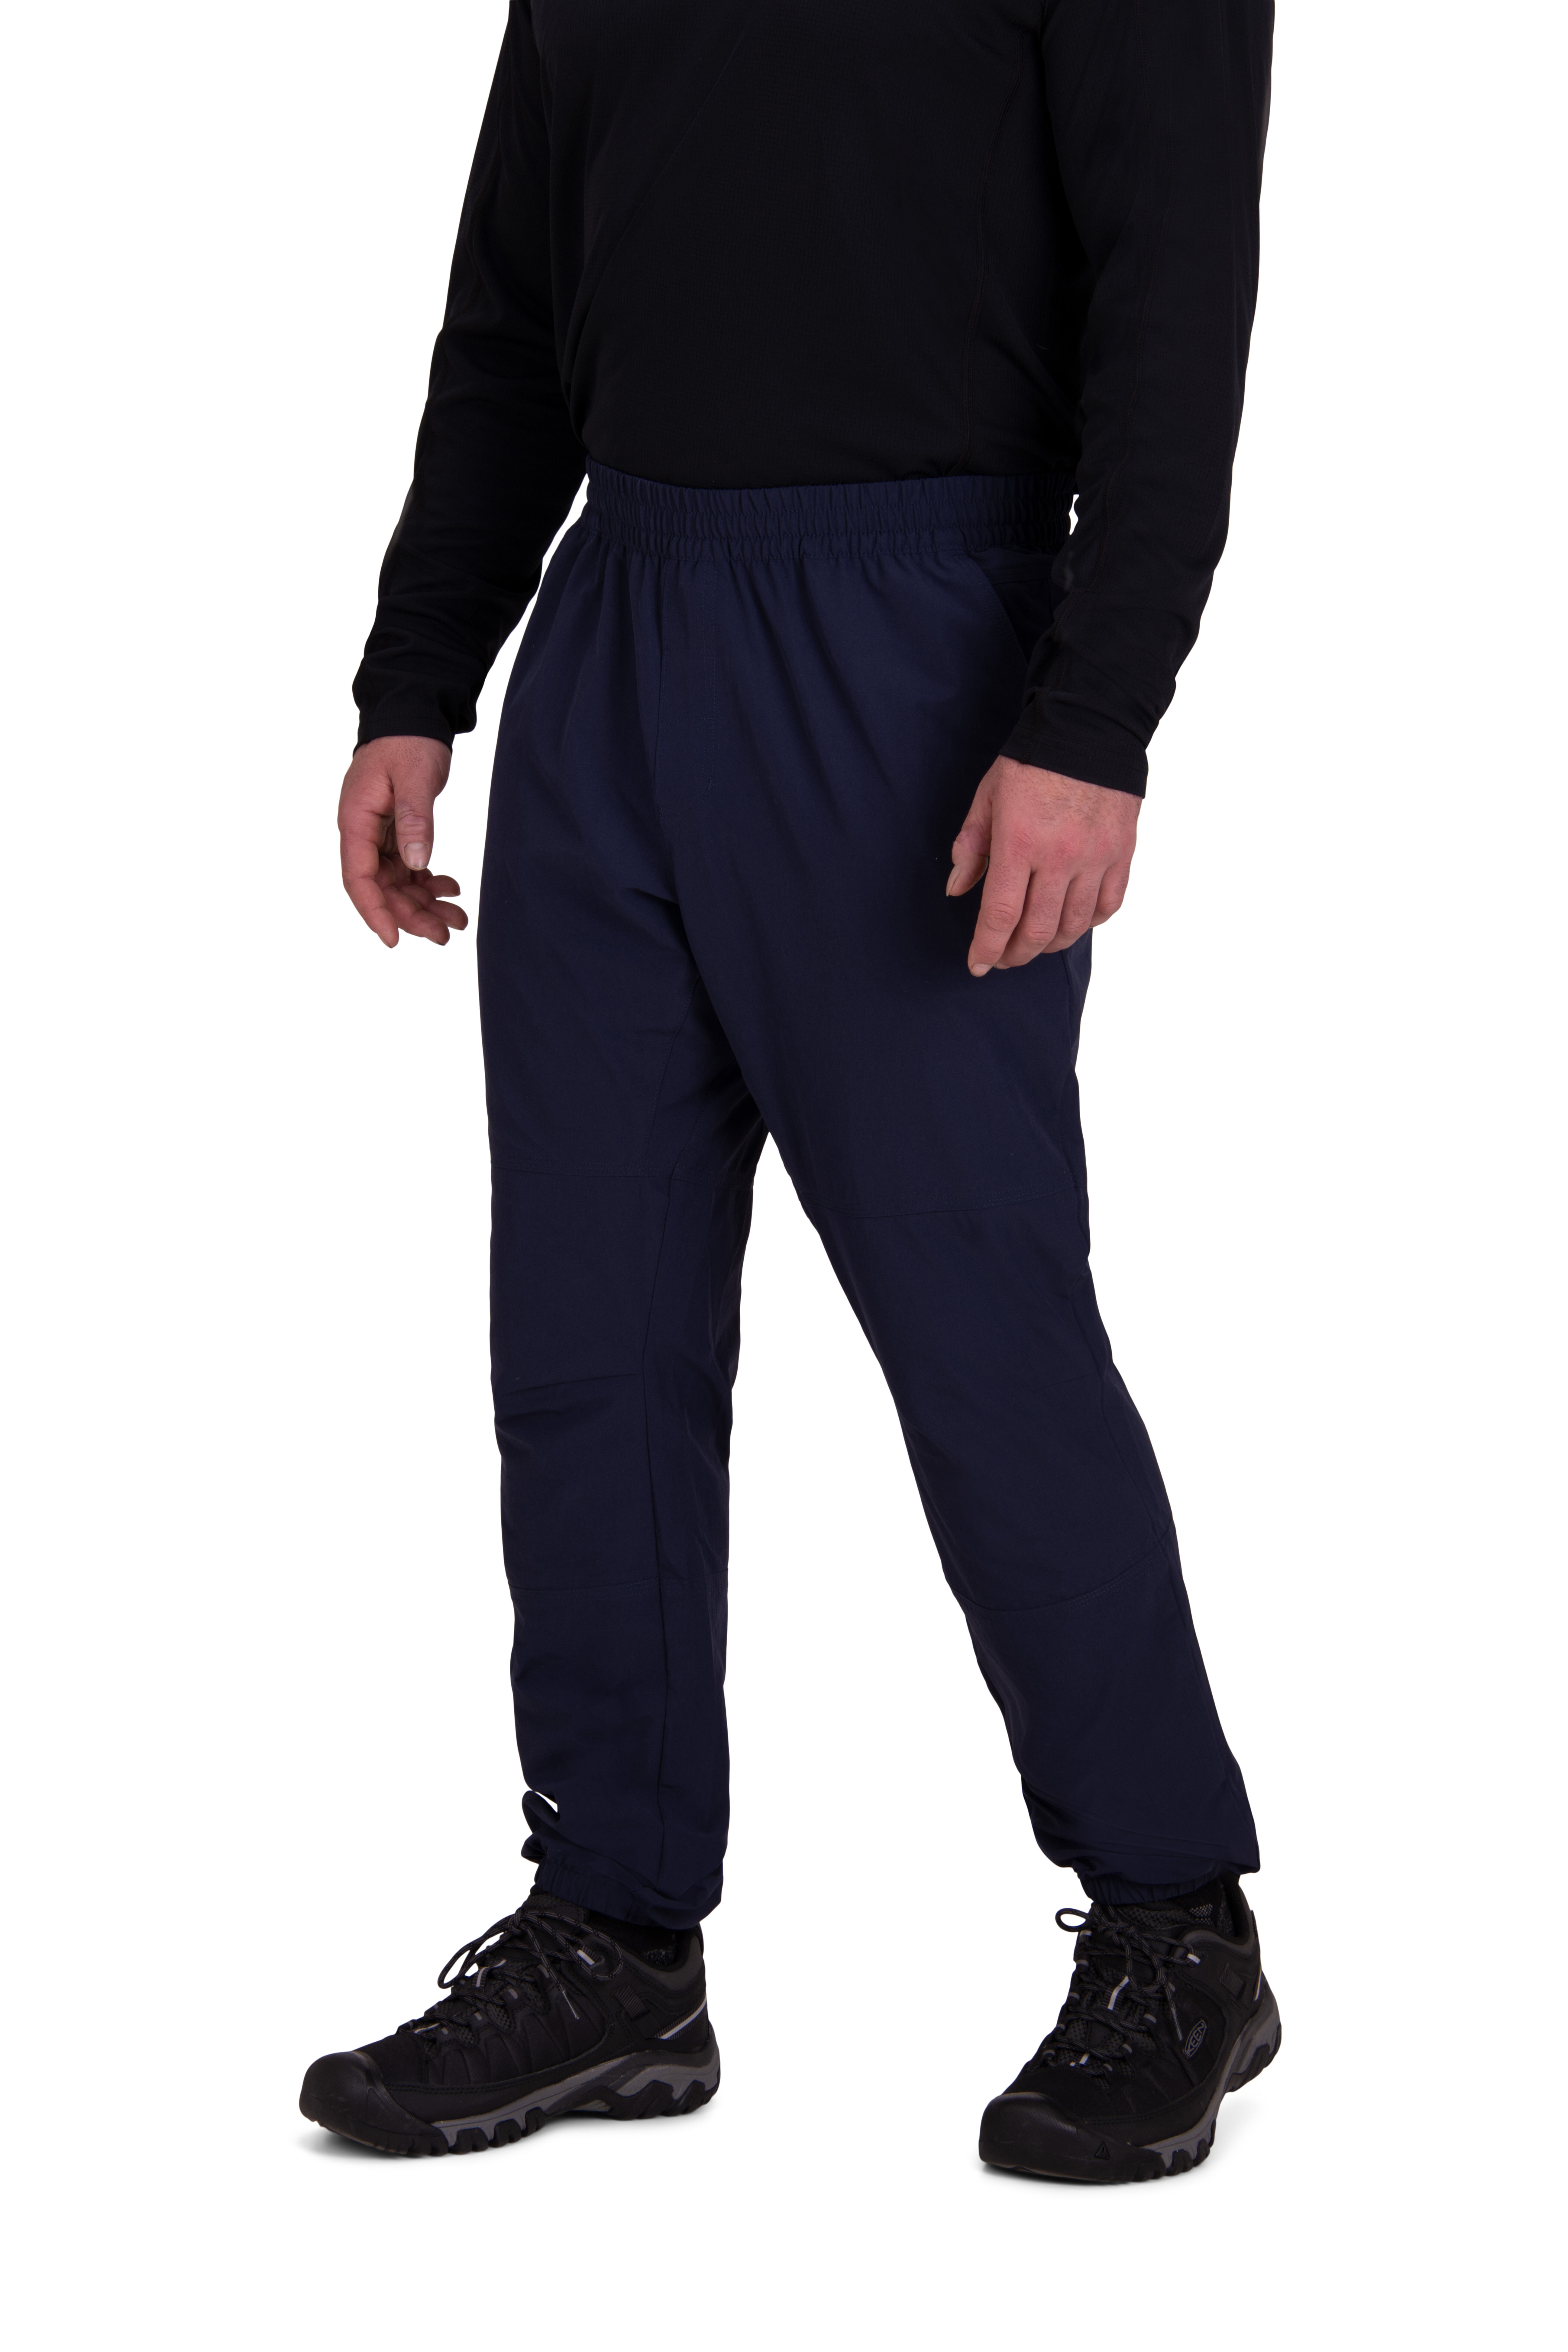 Polyester Lower Men's Dri- Fit Track Pant at Rs 230/piece in Mumbai | ID:  20821815997